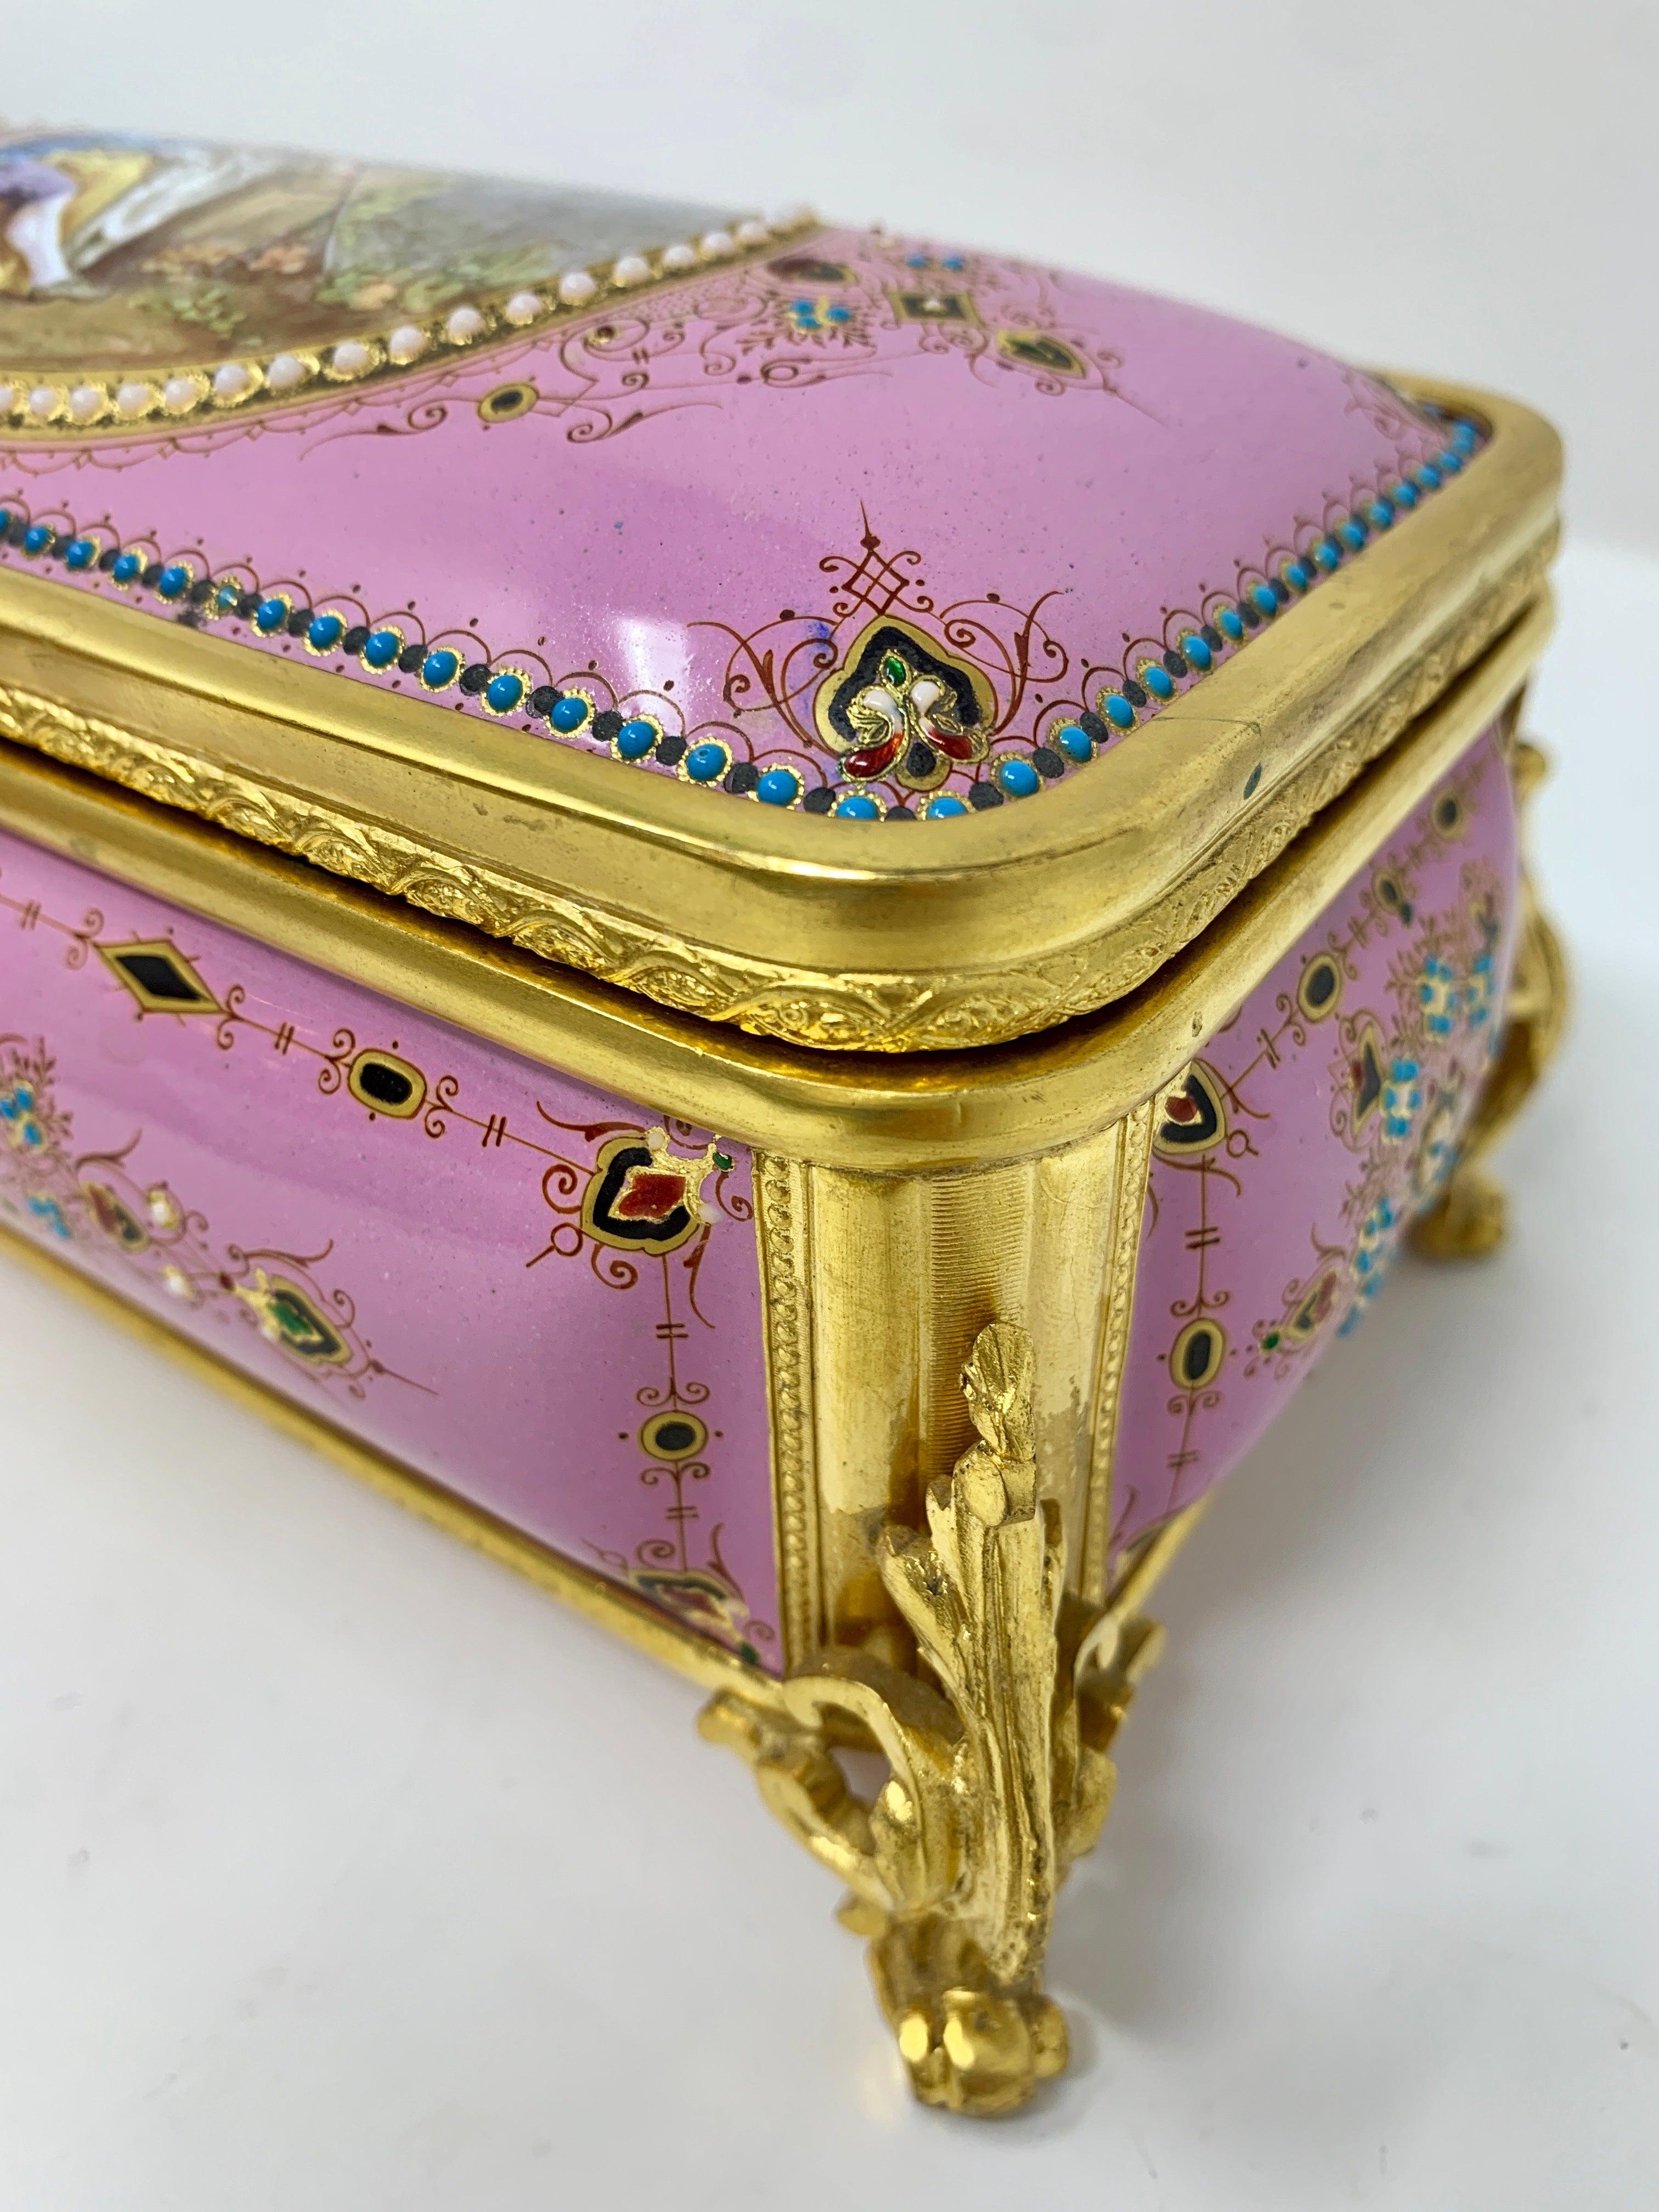 Antique French Pink Enameled Ormolu Box, circa 1860-1870 For Sale 1